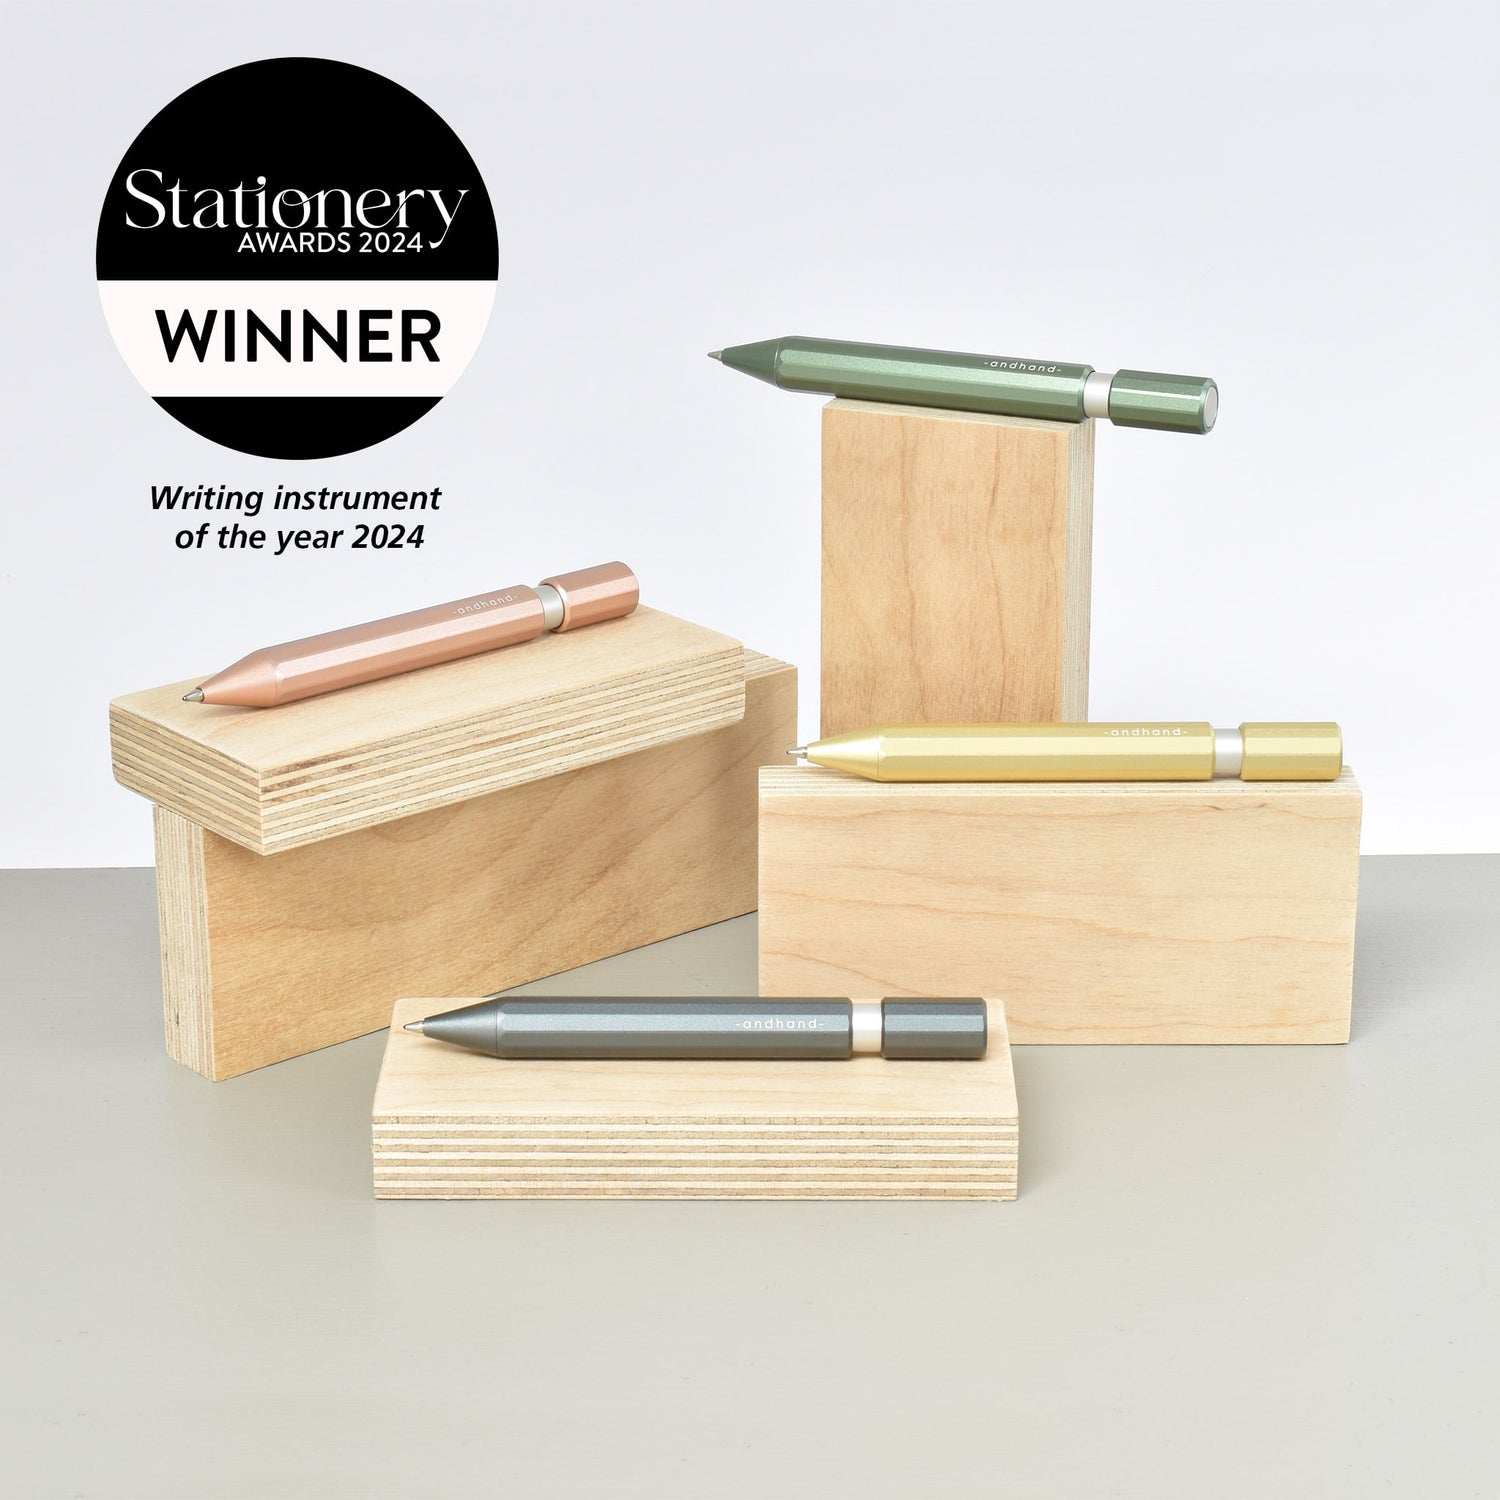 Aspect pen comes in Forest Green, Blush Pink, Gold Lustre and Slate grey anodized finishes. Winner of the stationery awards writing instrument of the year 2024.